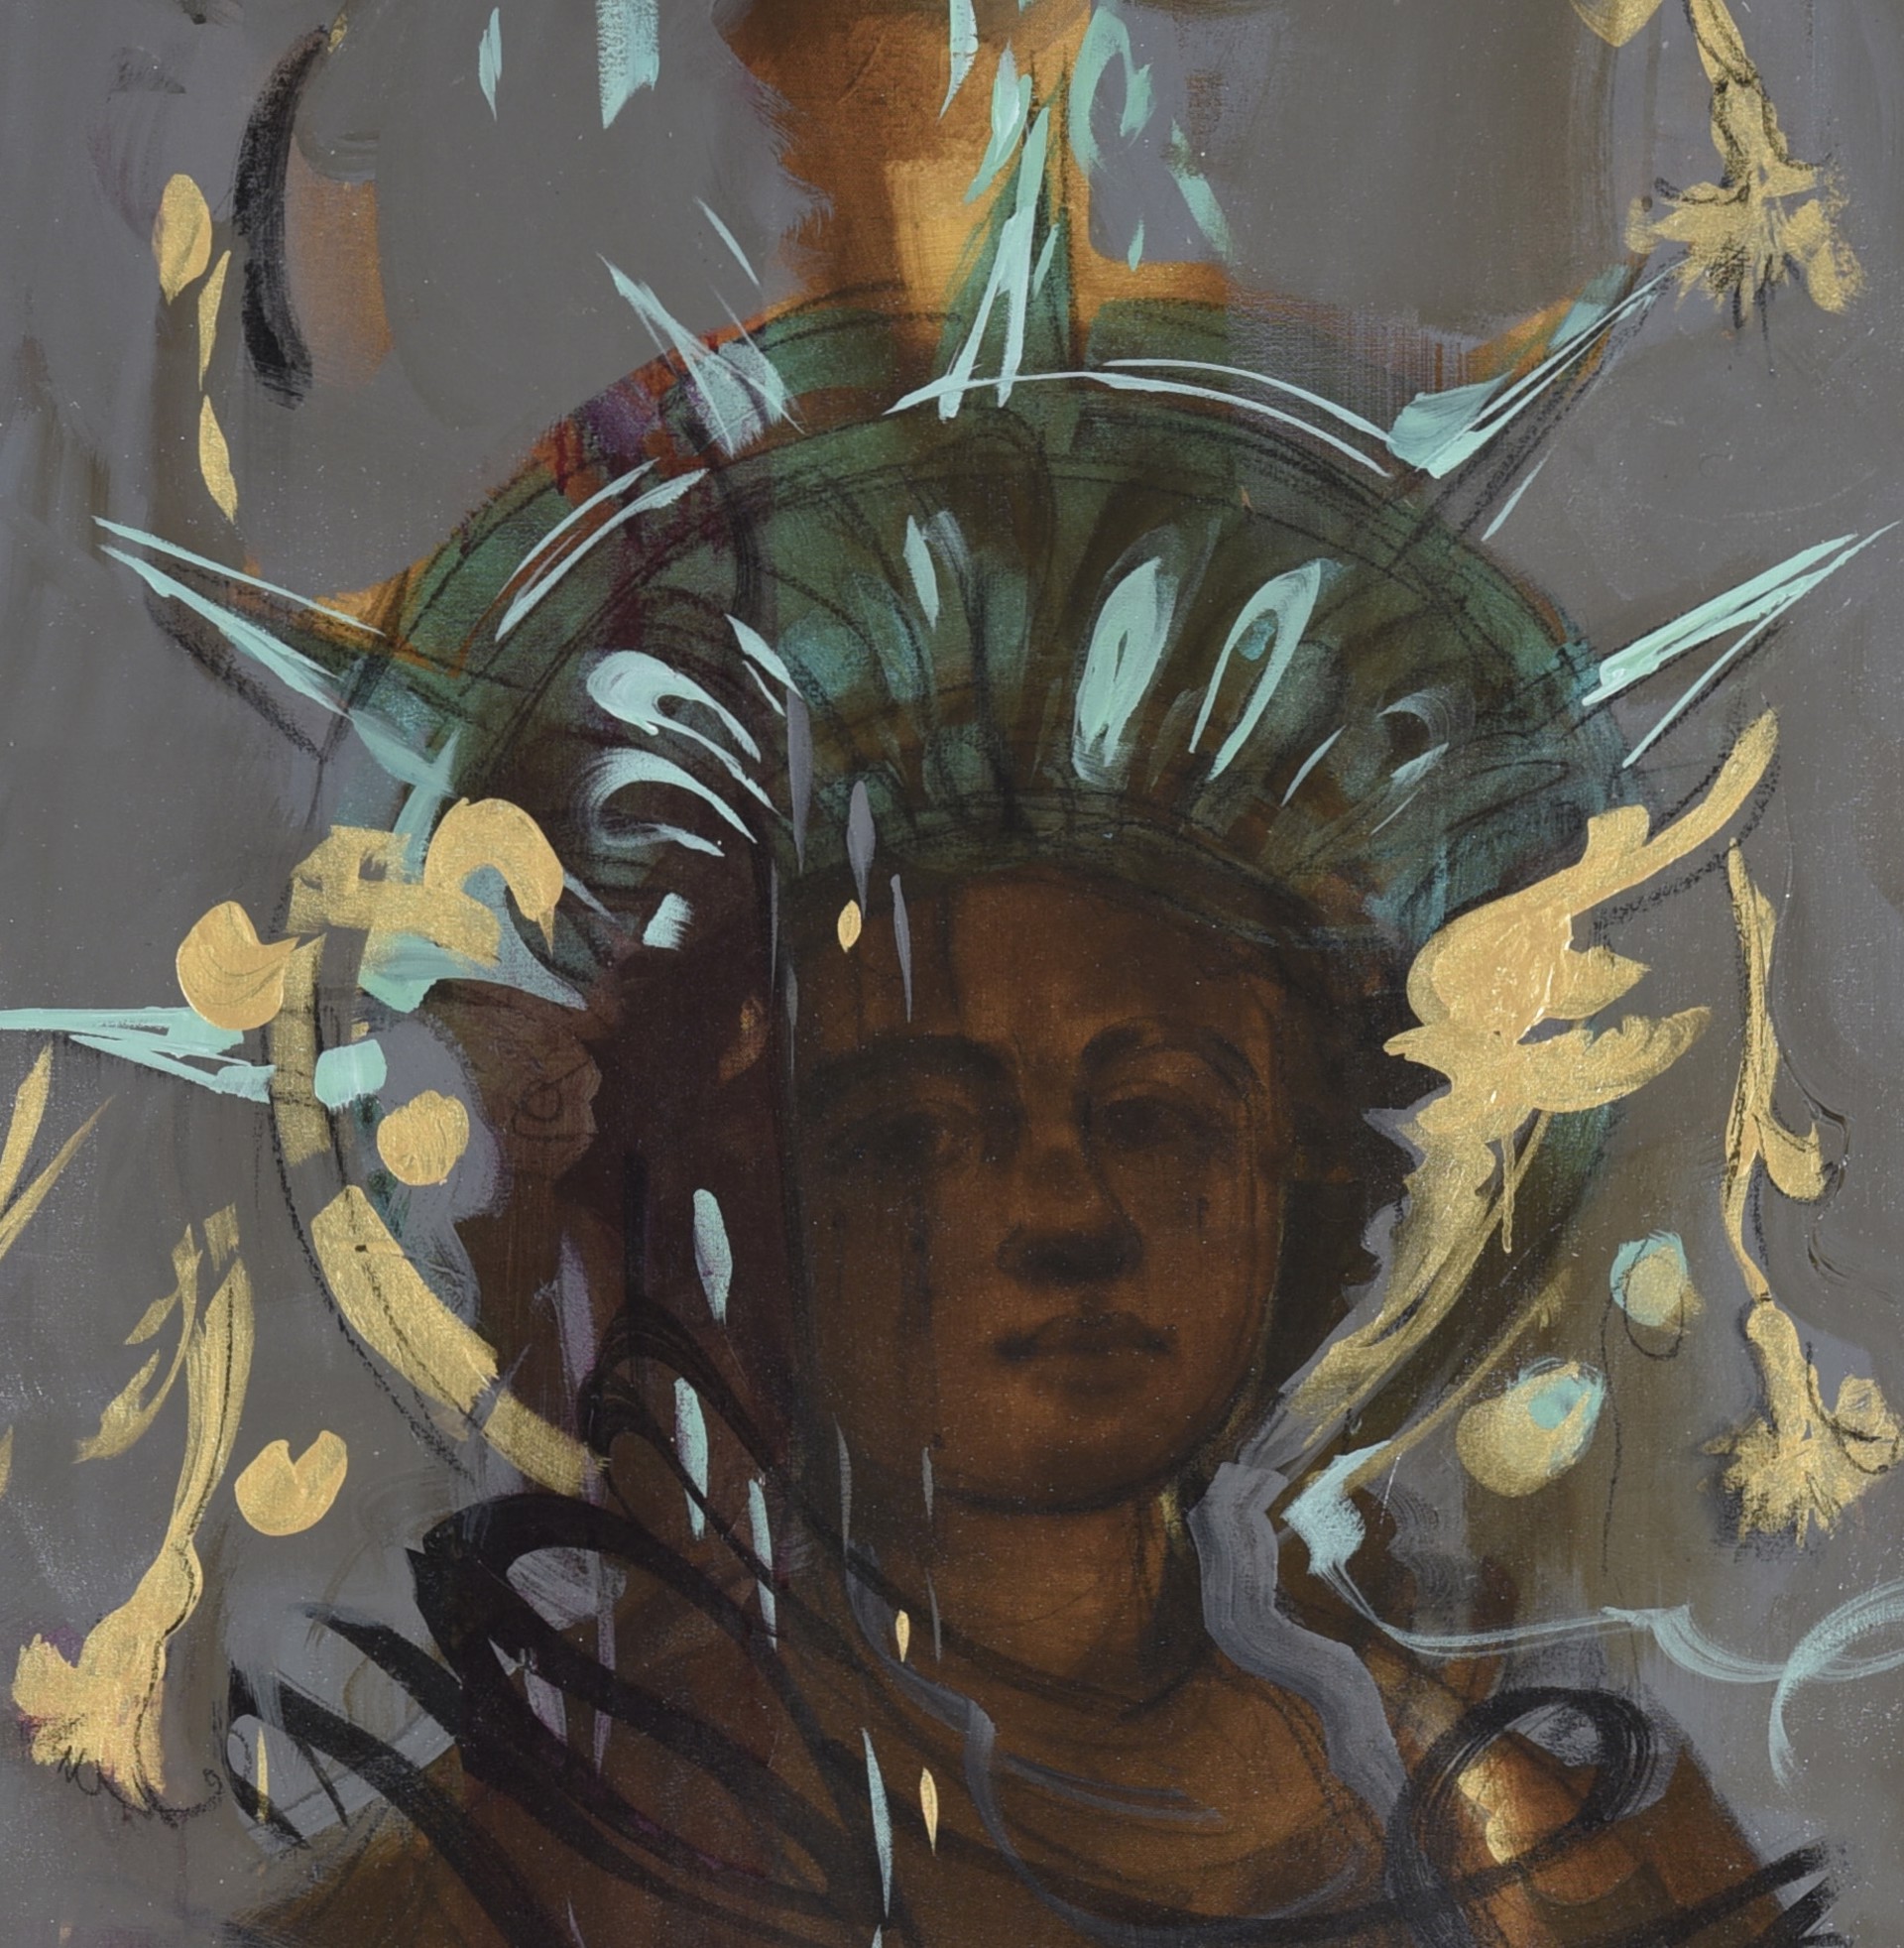 The Statue of Liberty by Scherezade Garcia